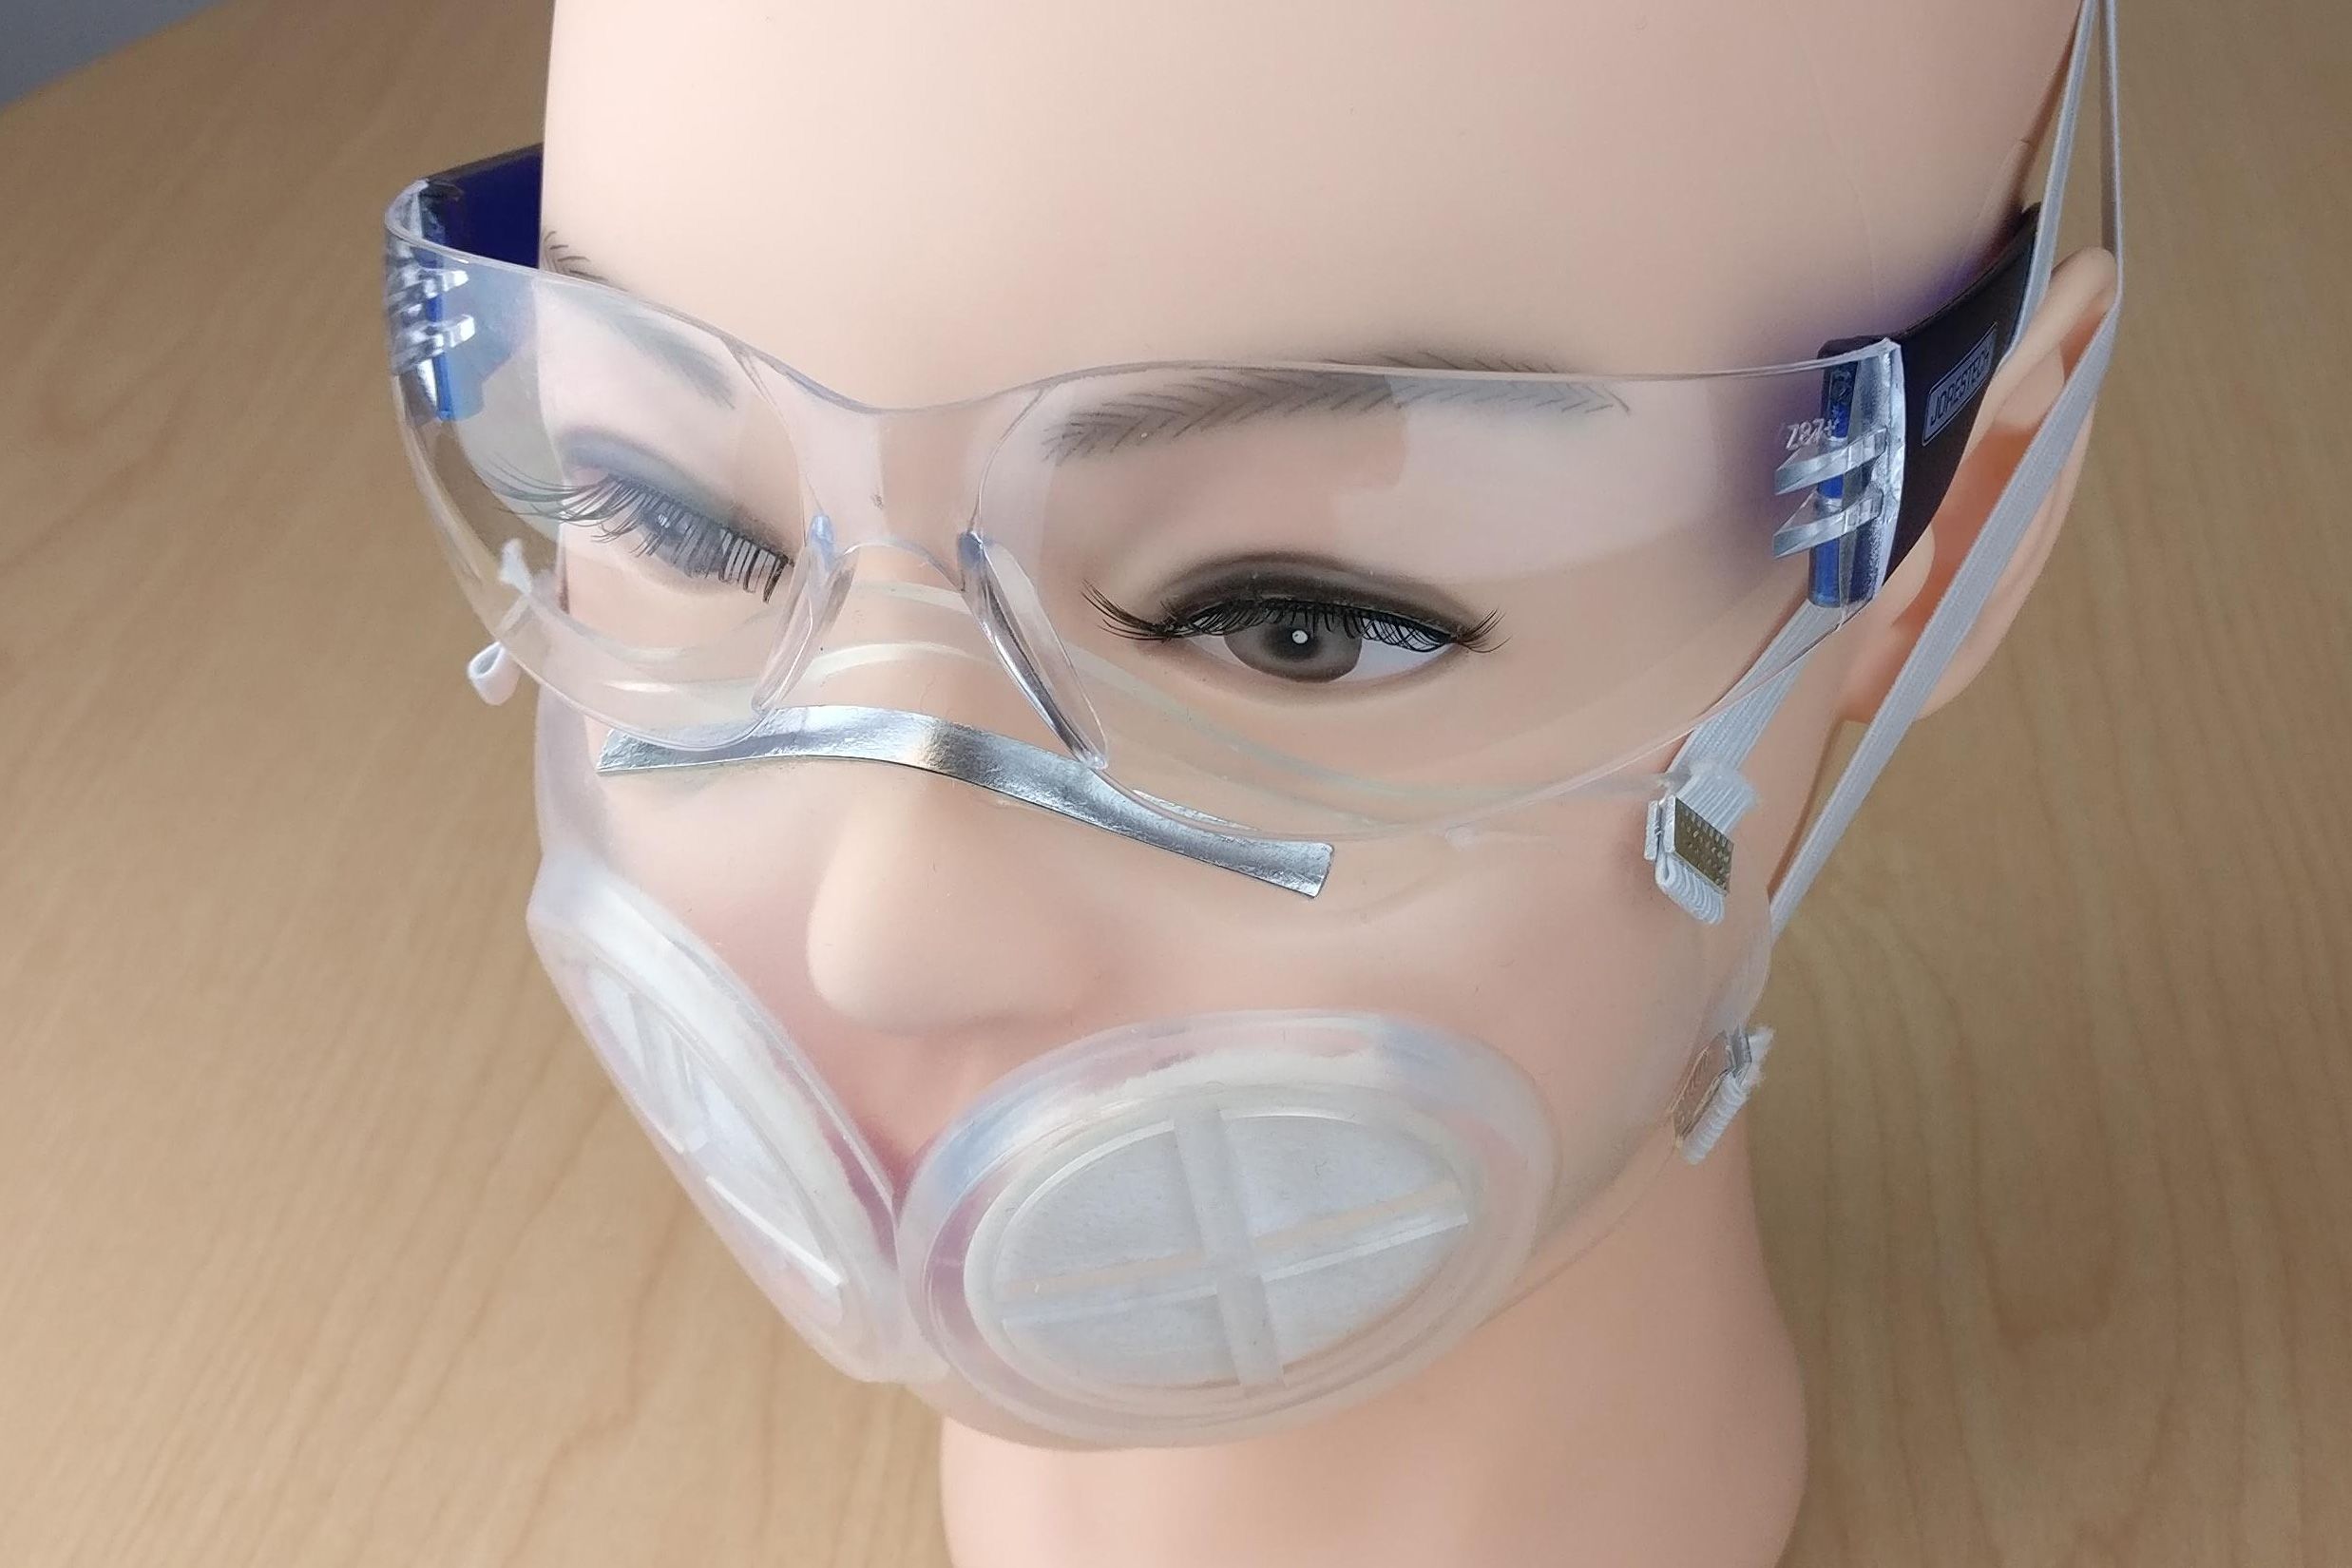 Engineers design a reusable, silicone rubber face mask | MIT News